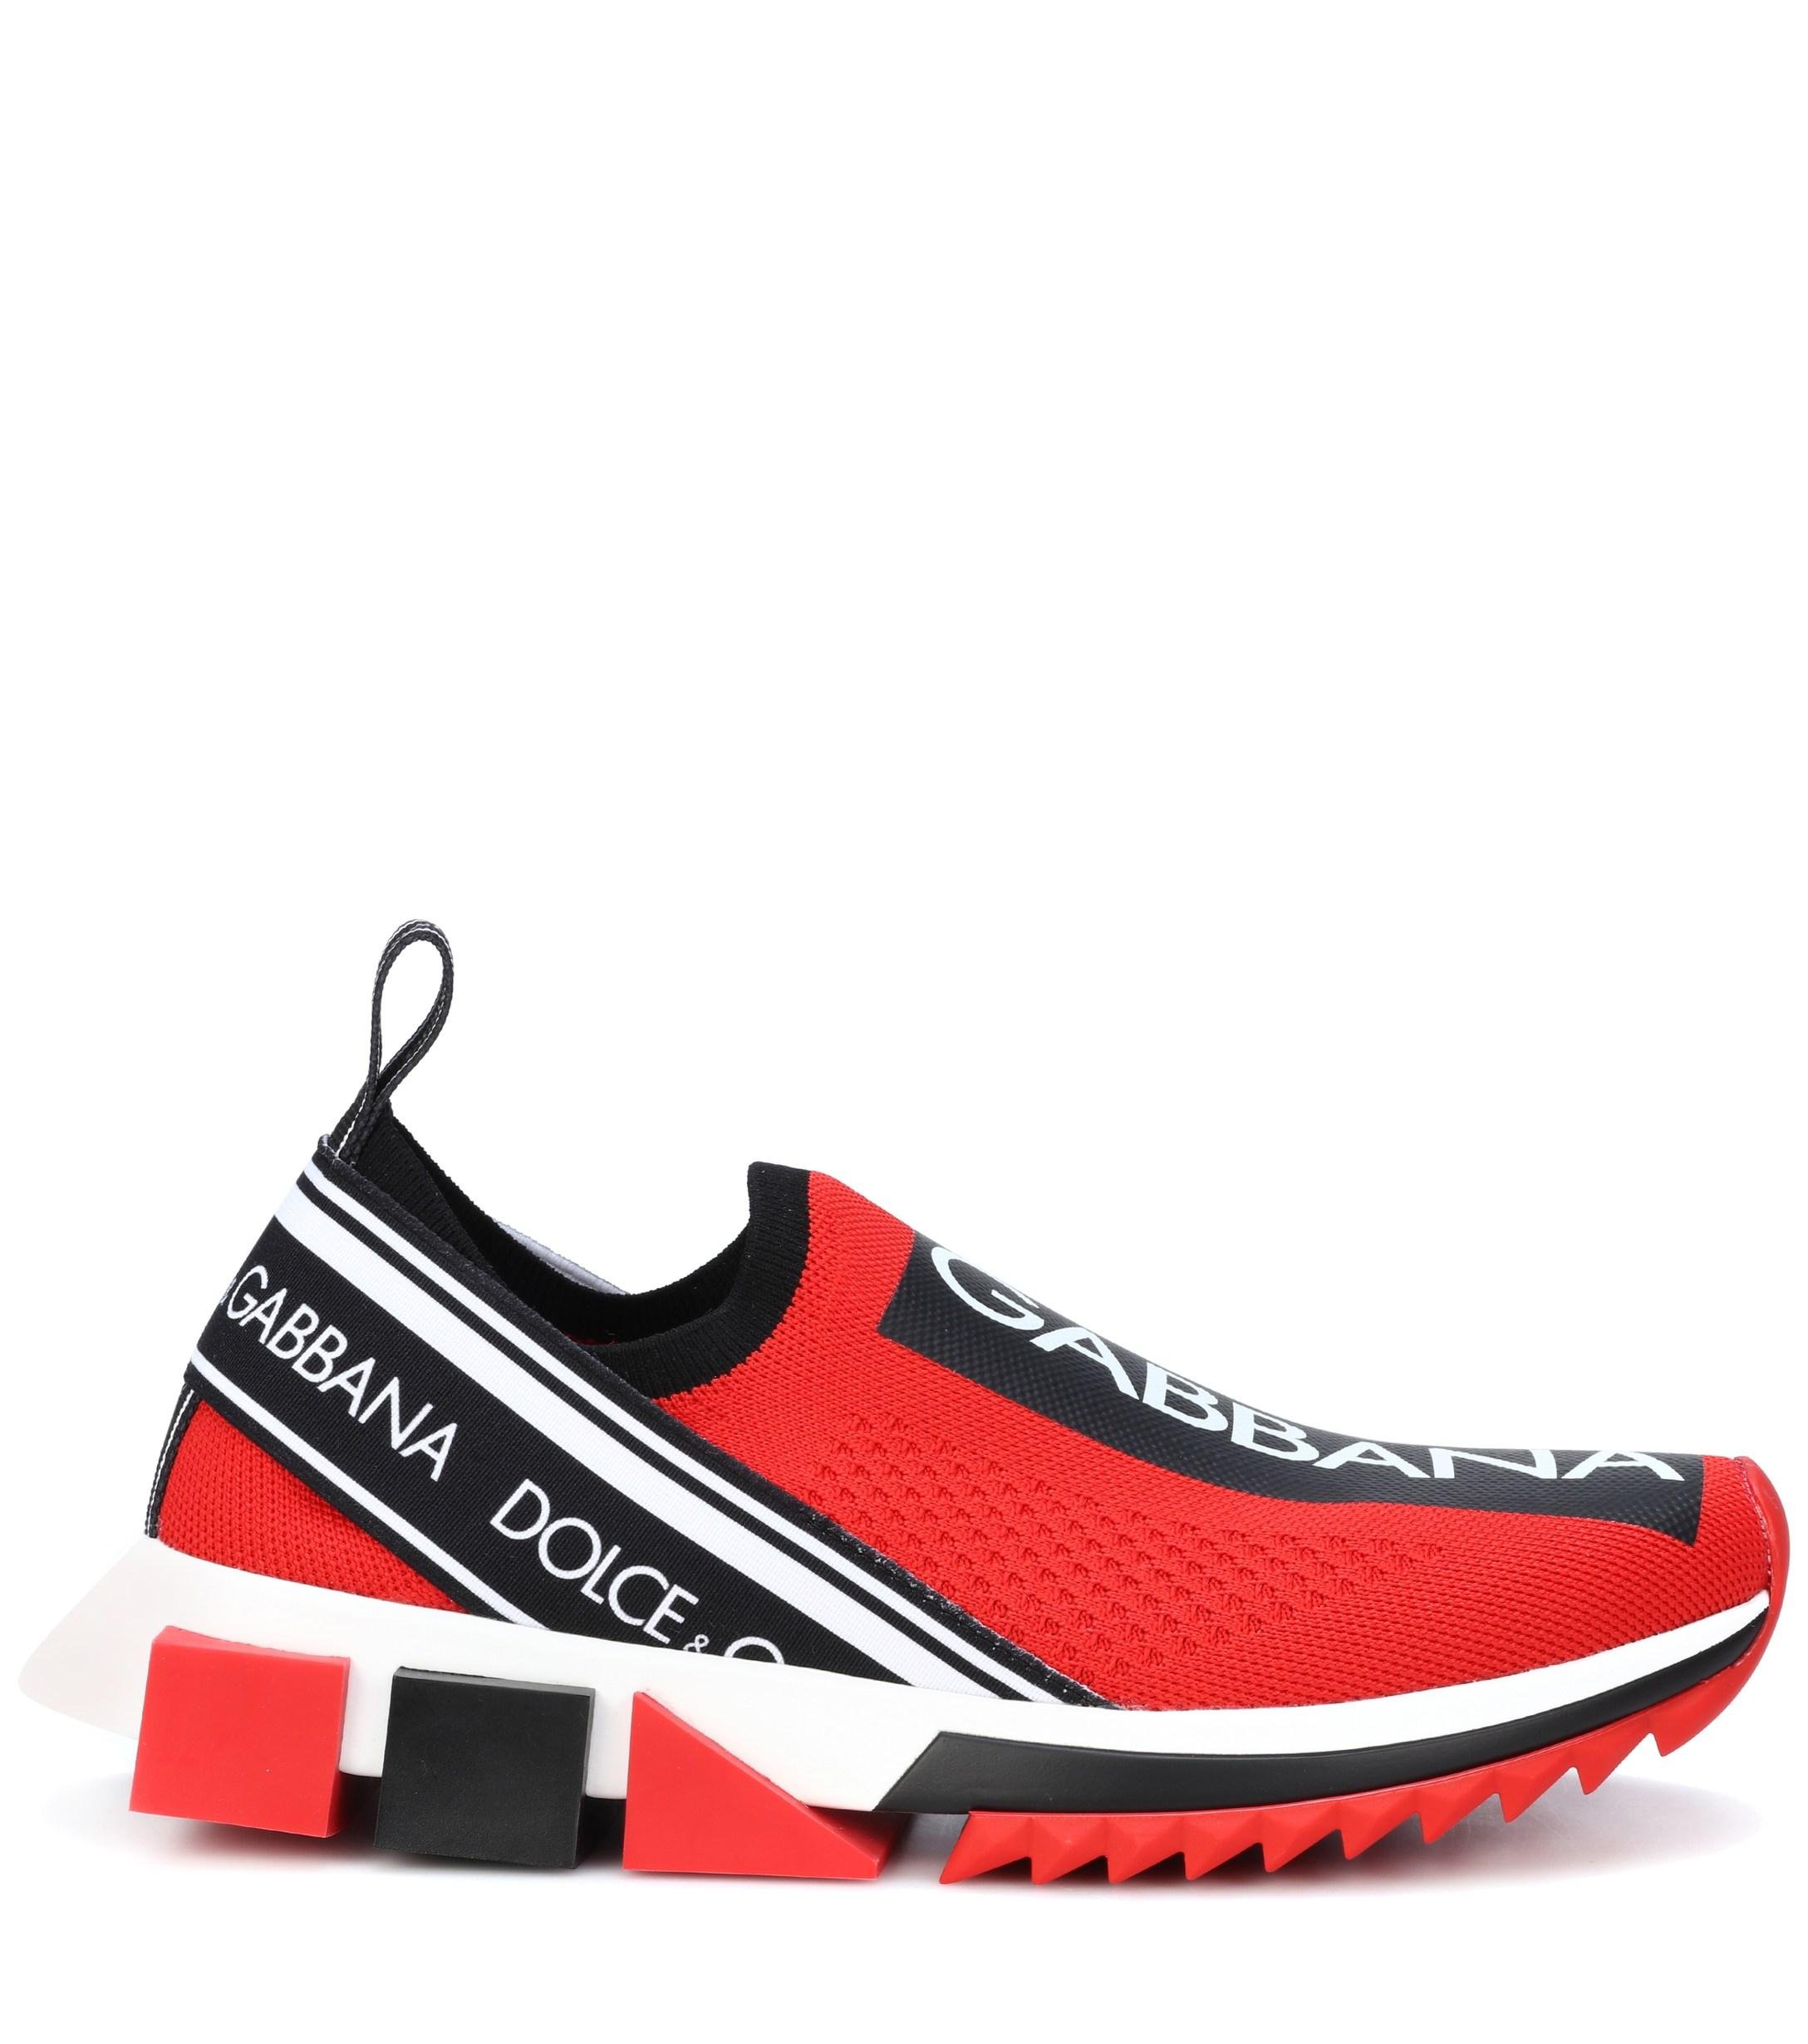 Dolce & Gabbana Sorrento Printed Sneakers in Red,Black (Red) - Lyst